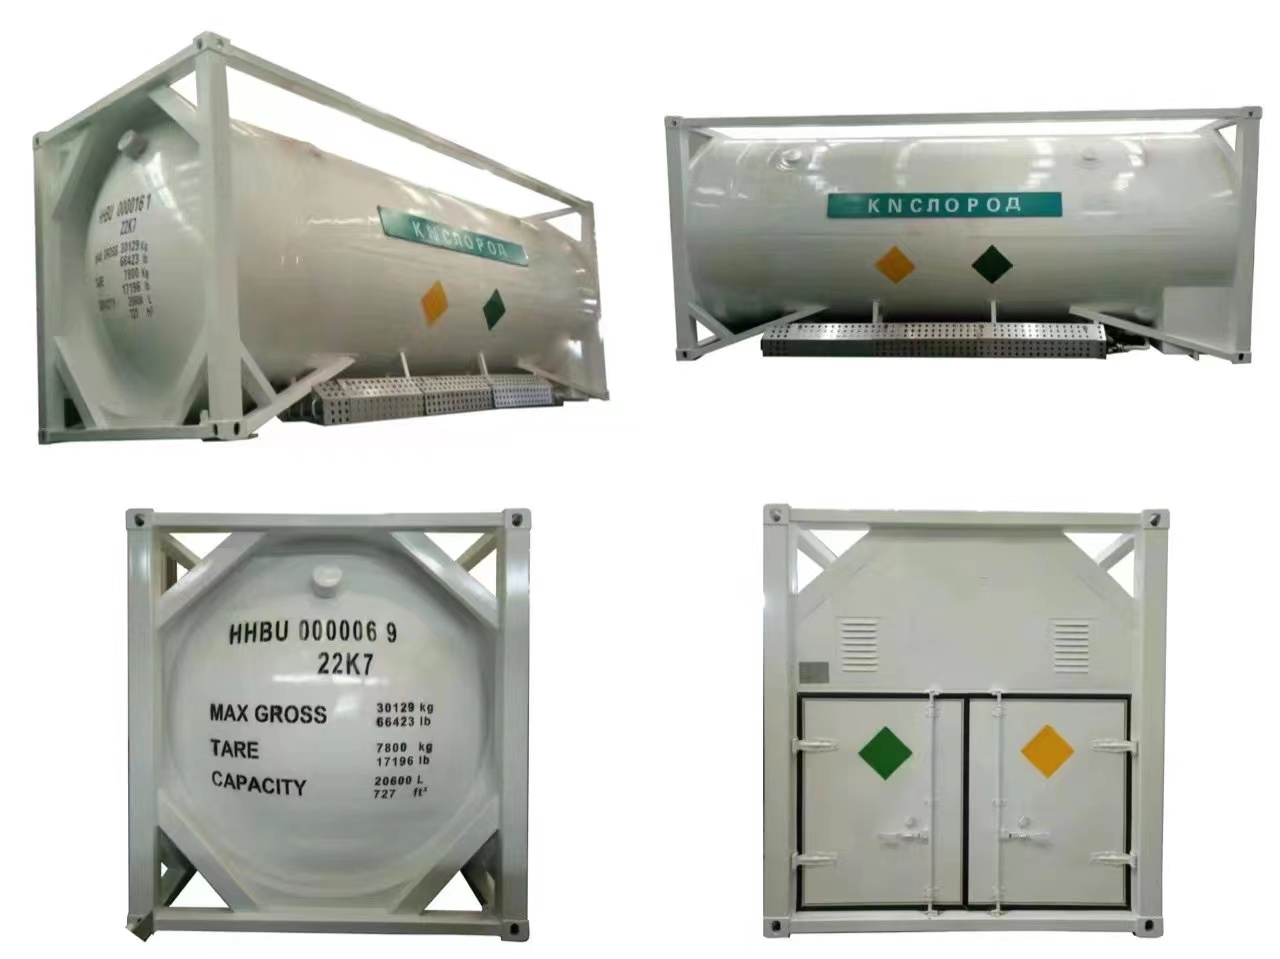 The Application of Fast Chill Technology in Low-Temperature Storage Tanks